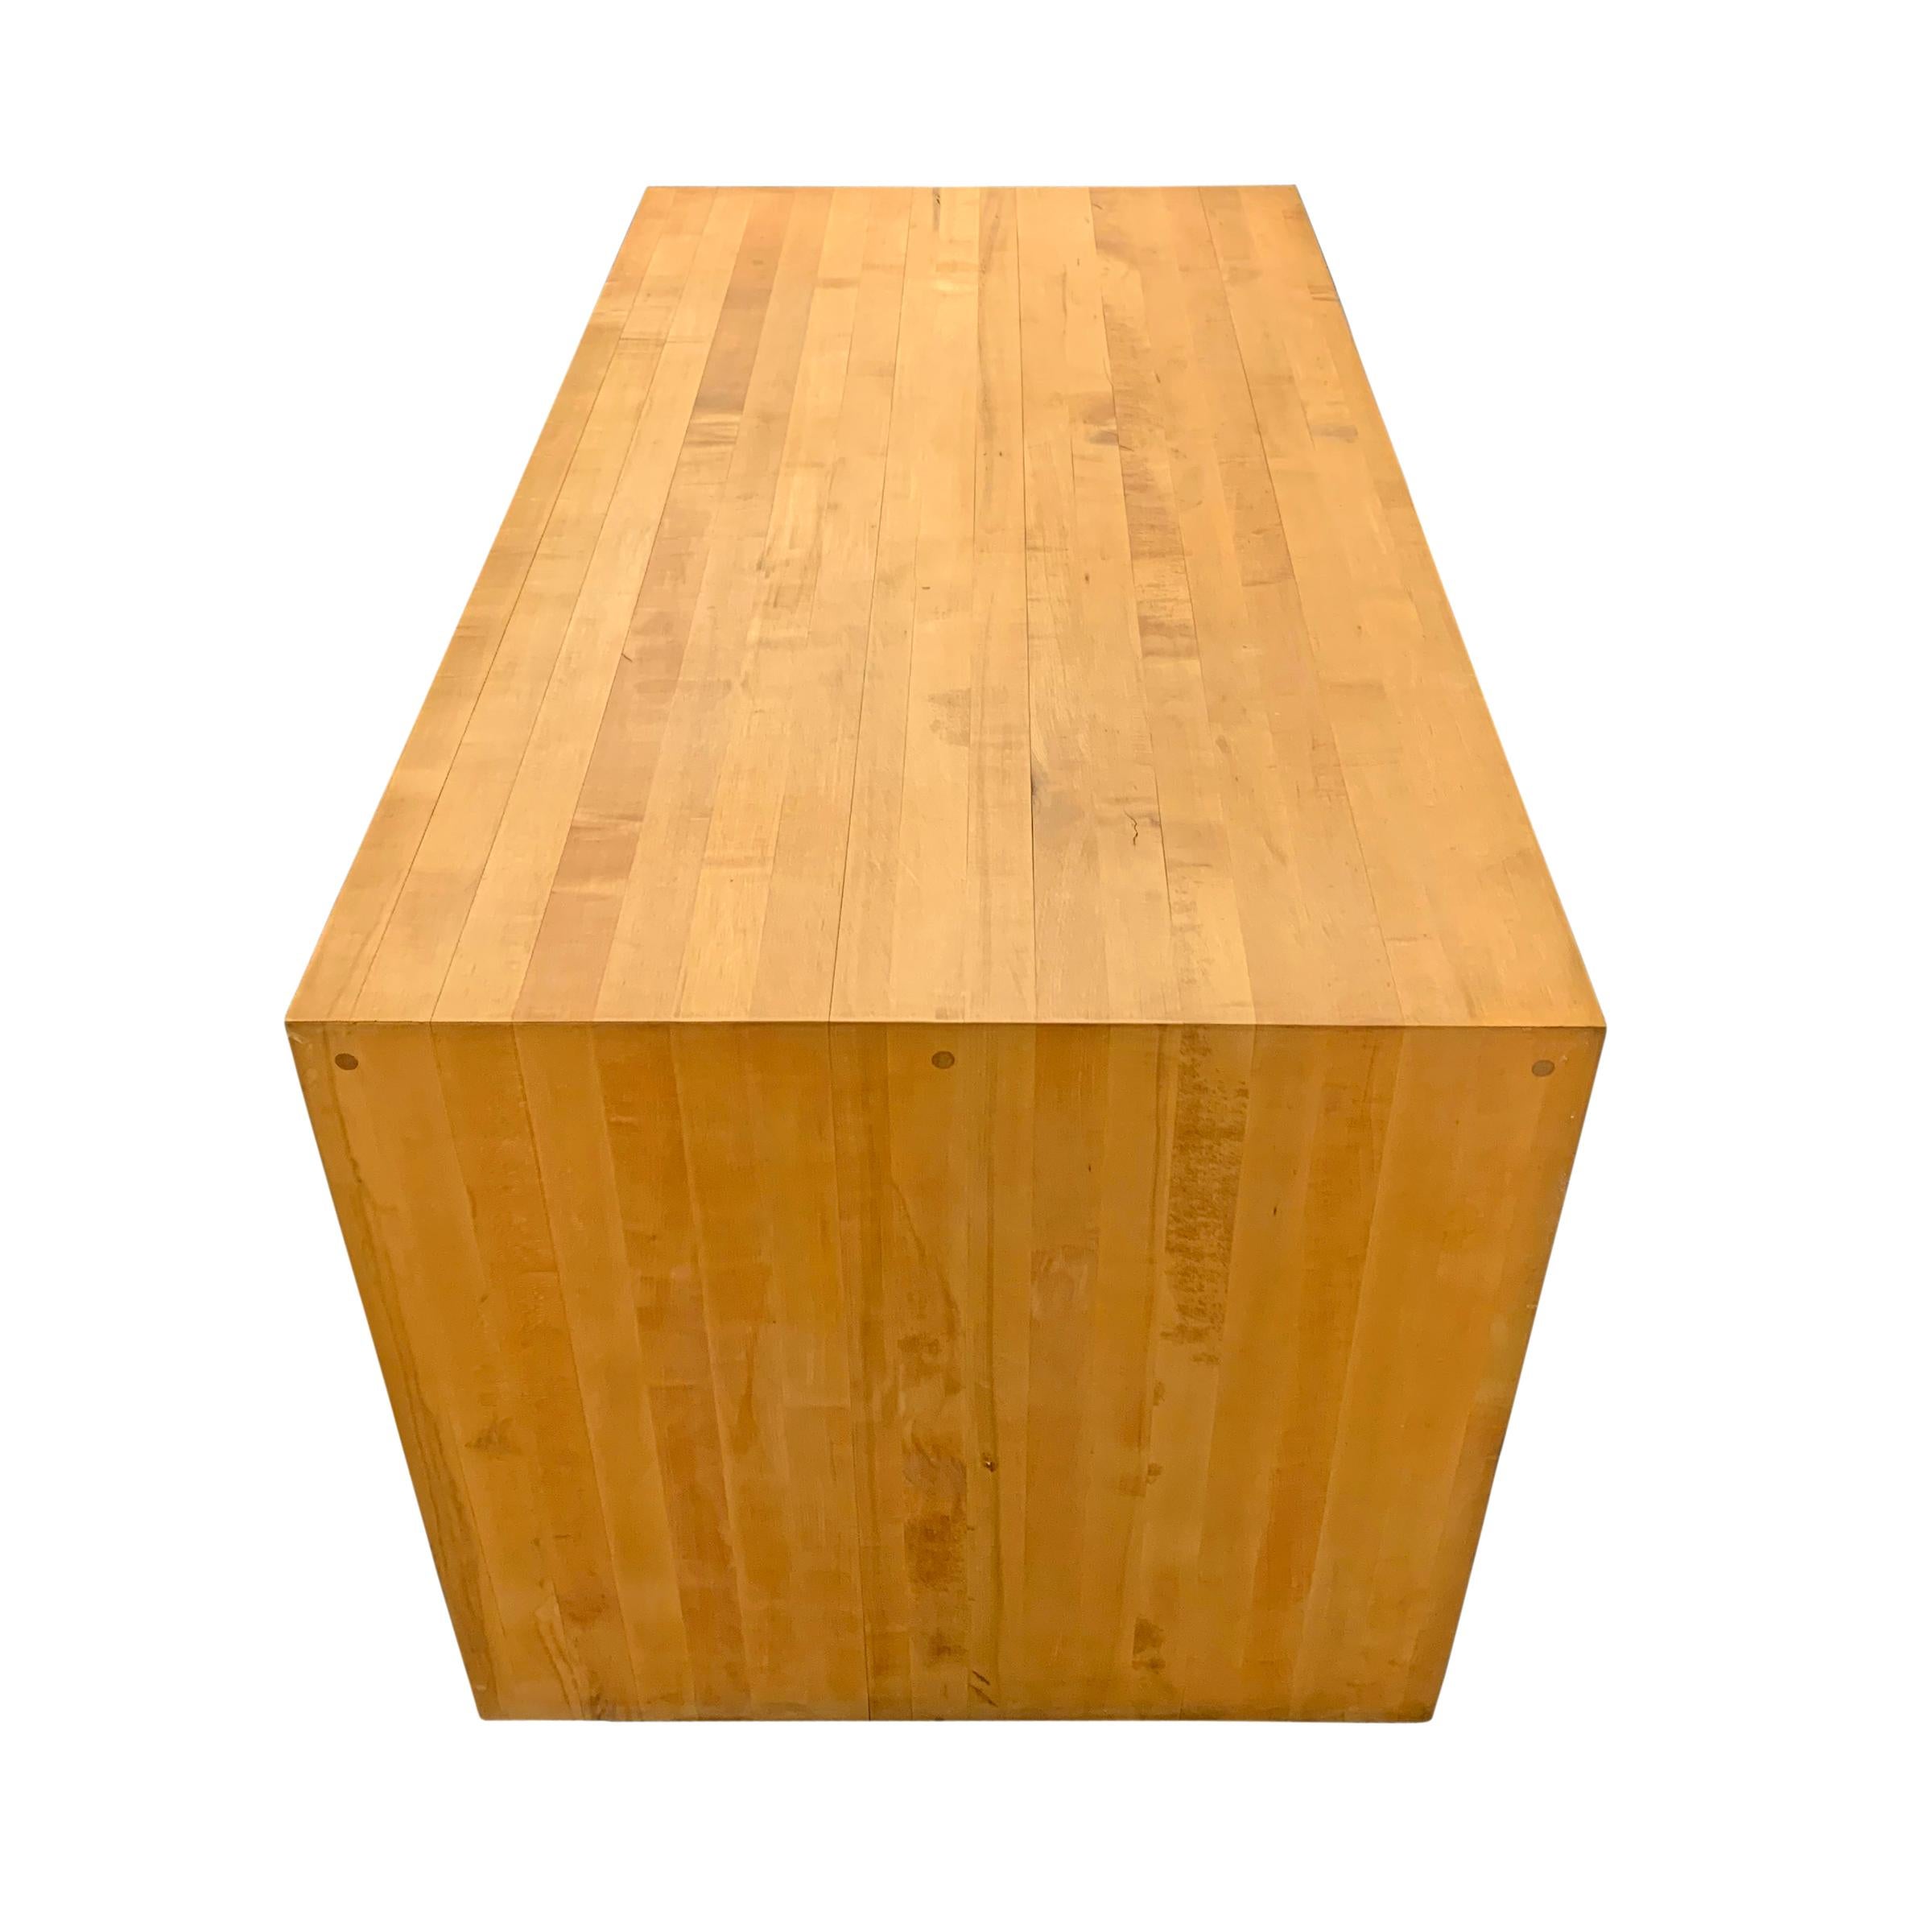 20th Century American Maple Butcher Block Parsons Table For Sale